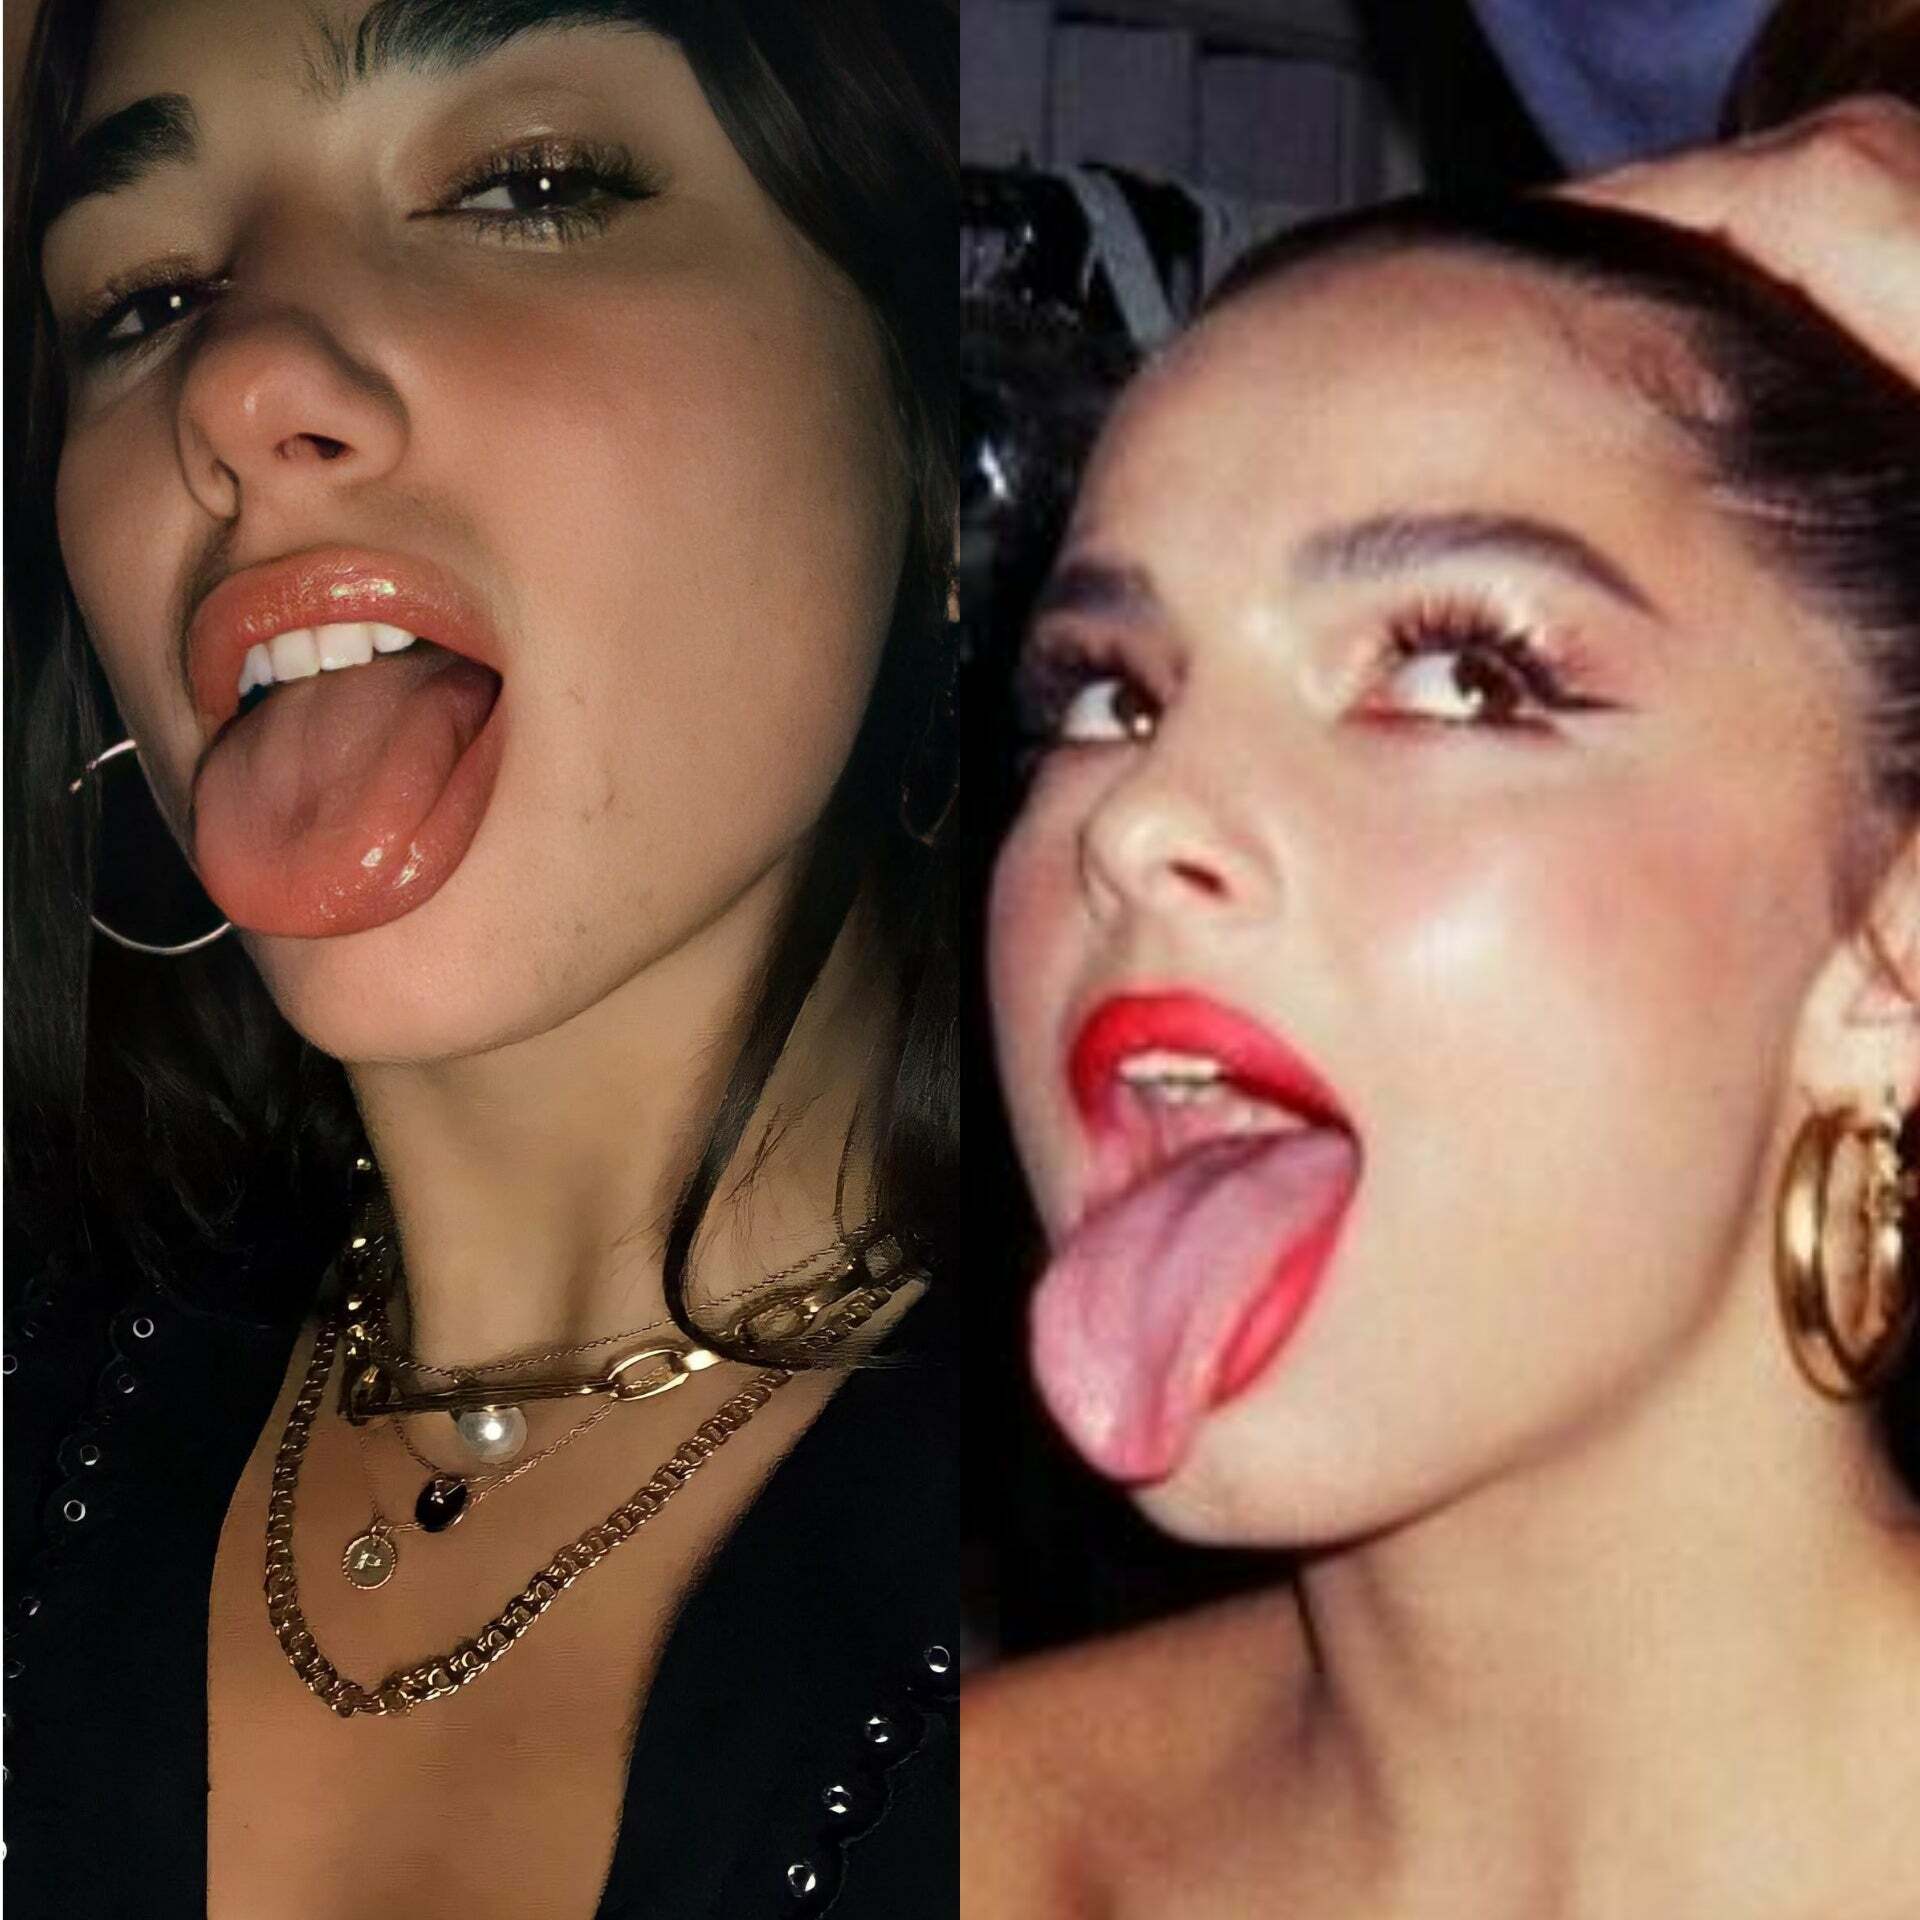 On which tongue are you gonna cumDua Lipas or Addison